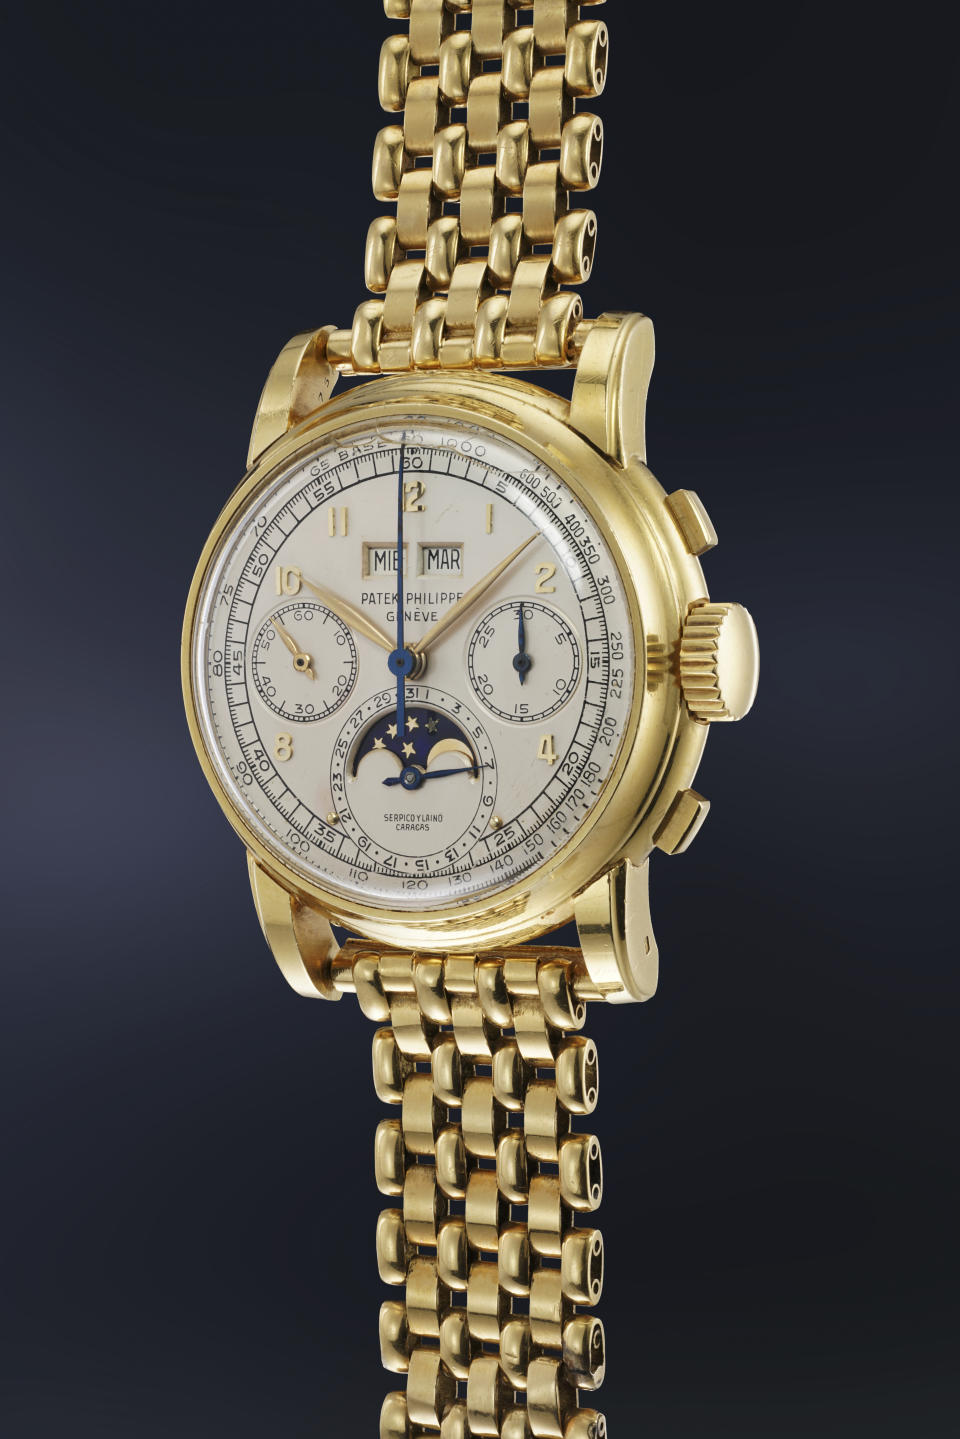 Patek Philippe Reference 2499 from 1952.